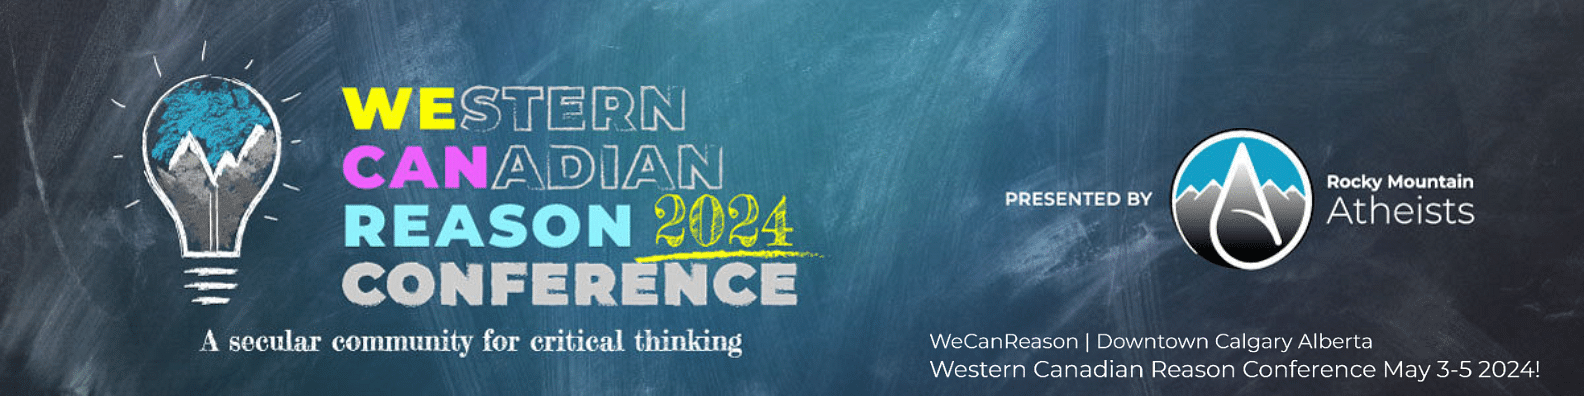 Western Canadian Reason Conference 2024